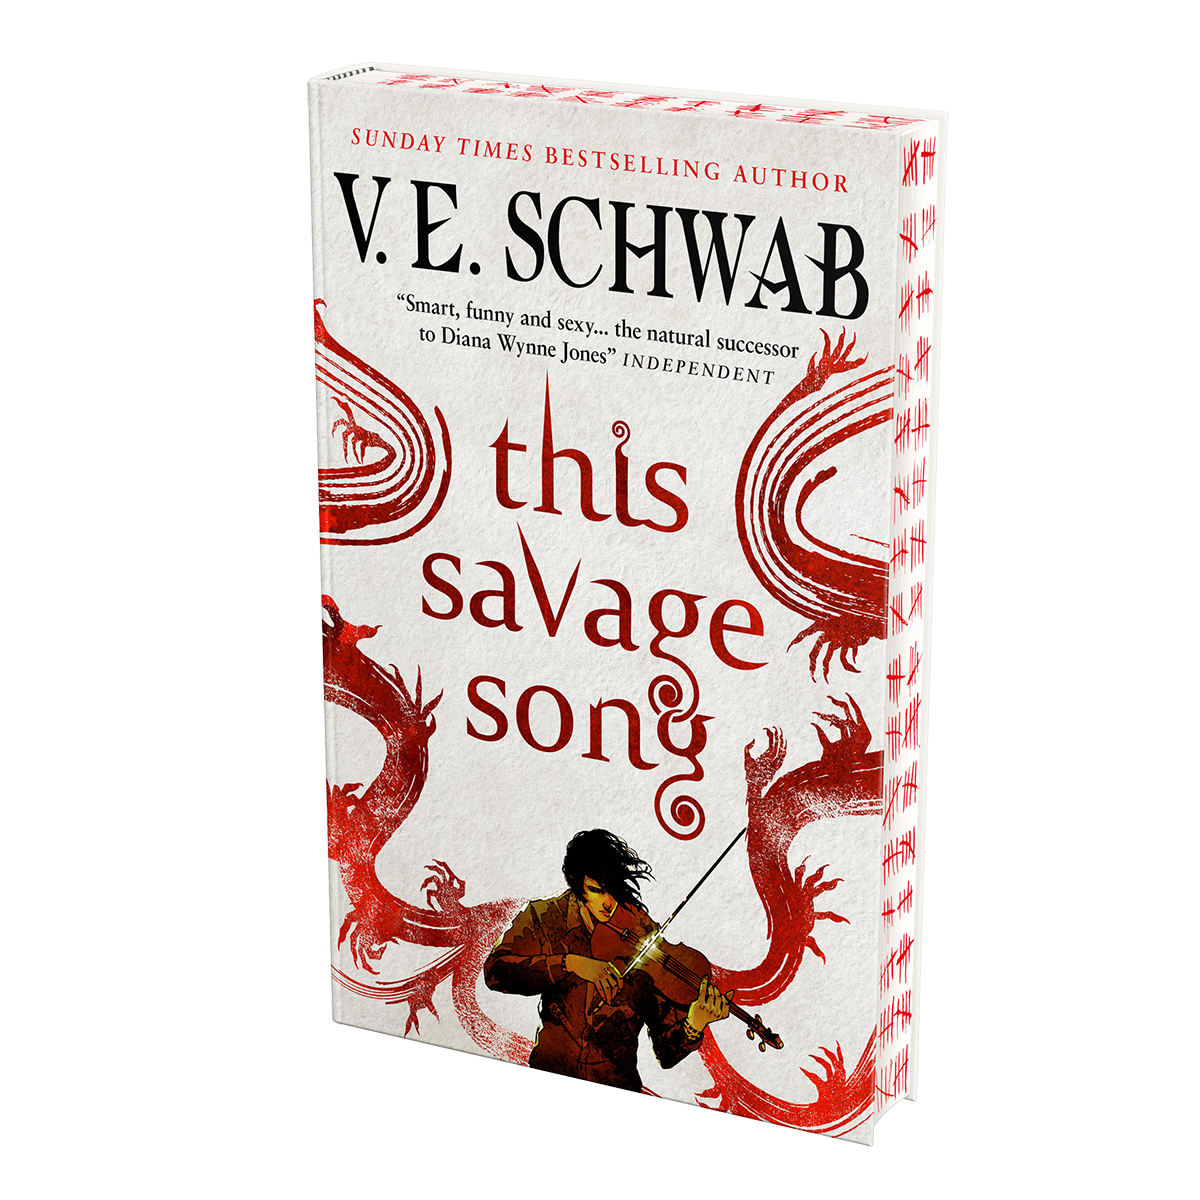 This Savage Song collectors hardback by V.E. Schwab book cover